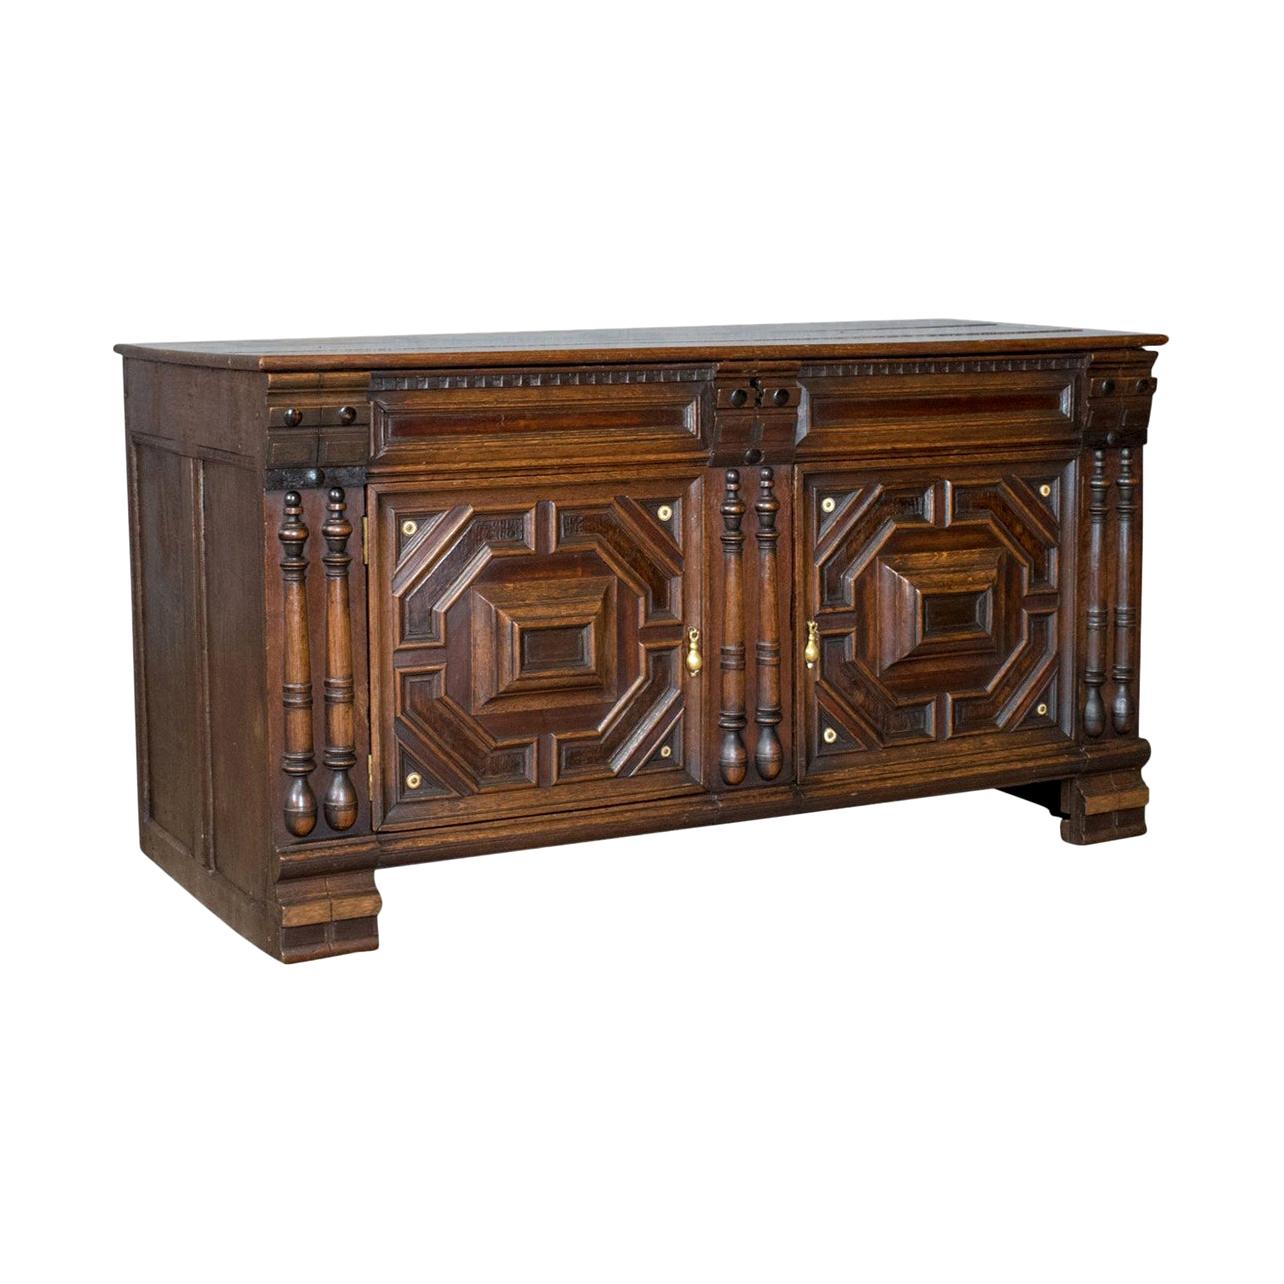 Antique Chest, French Coffer, Oak, Early 19th Century, circa 1800